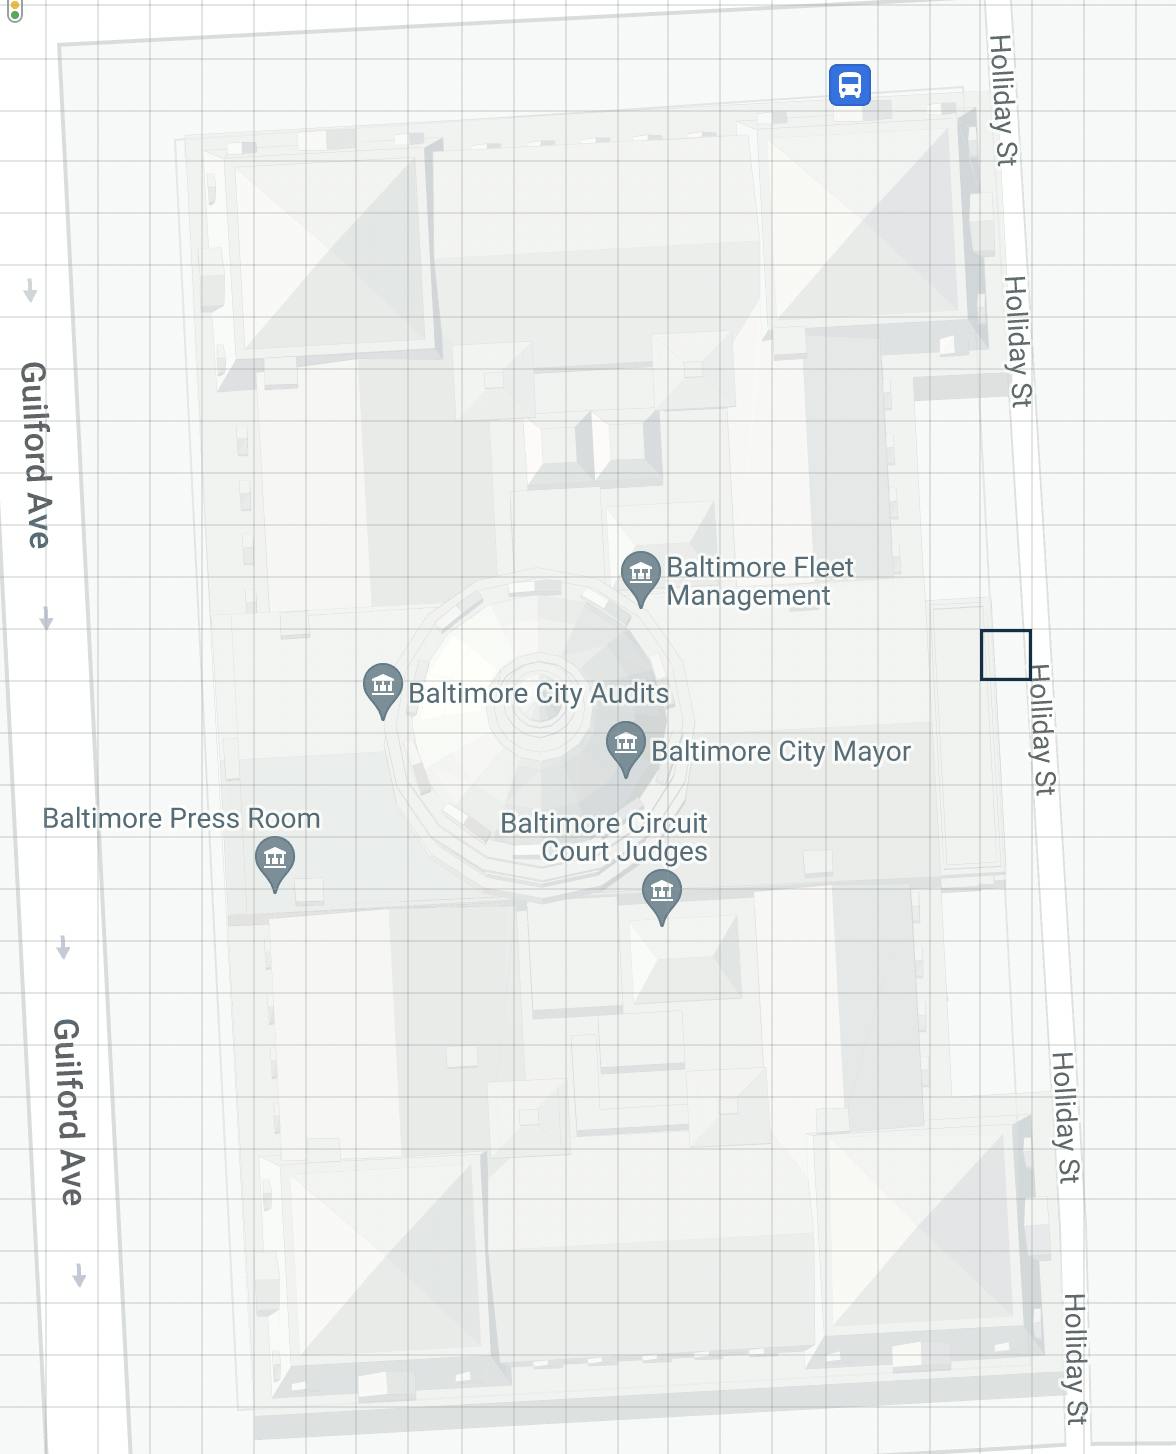 Screenshot of What3Words showing the 3 meter grid overlaying Baltimore City Hall